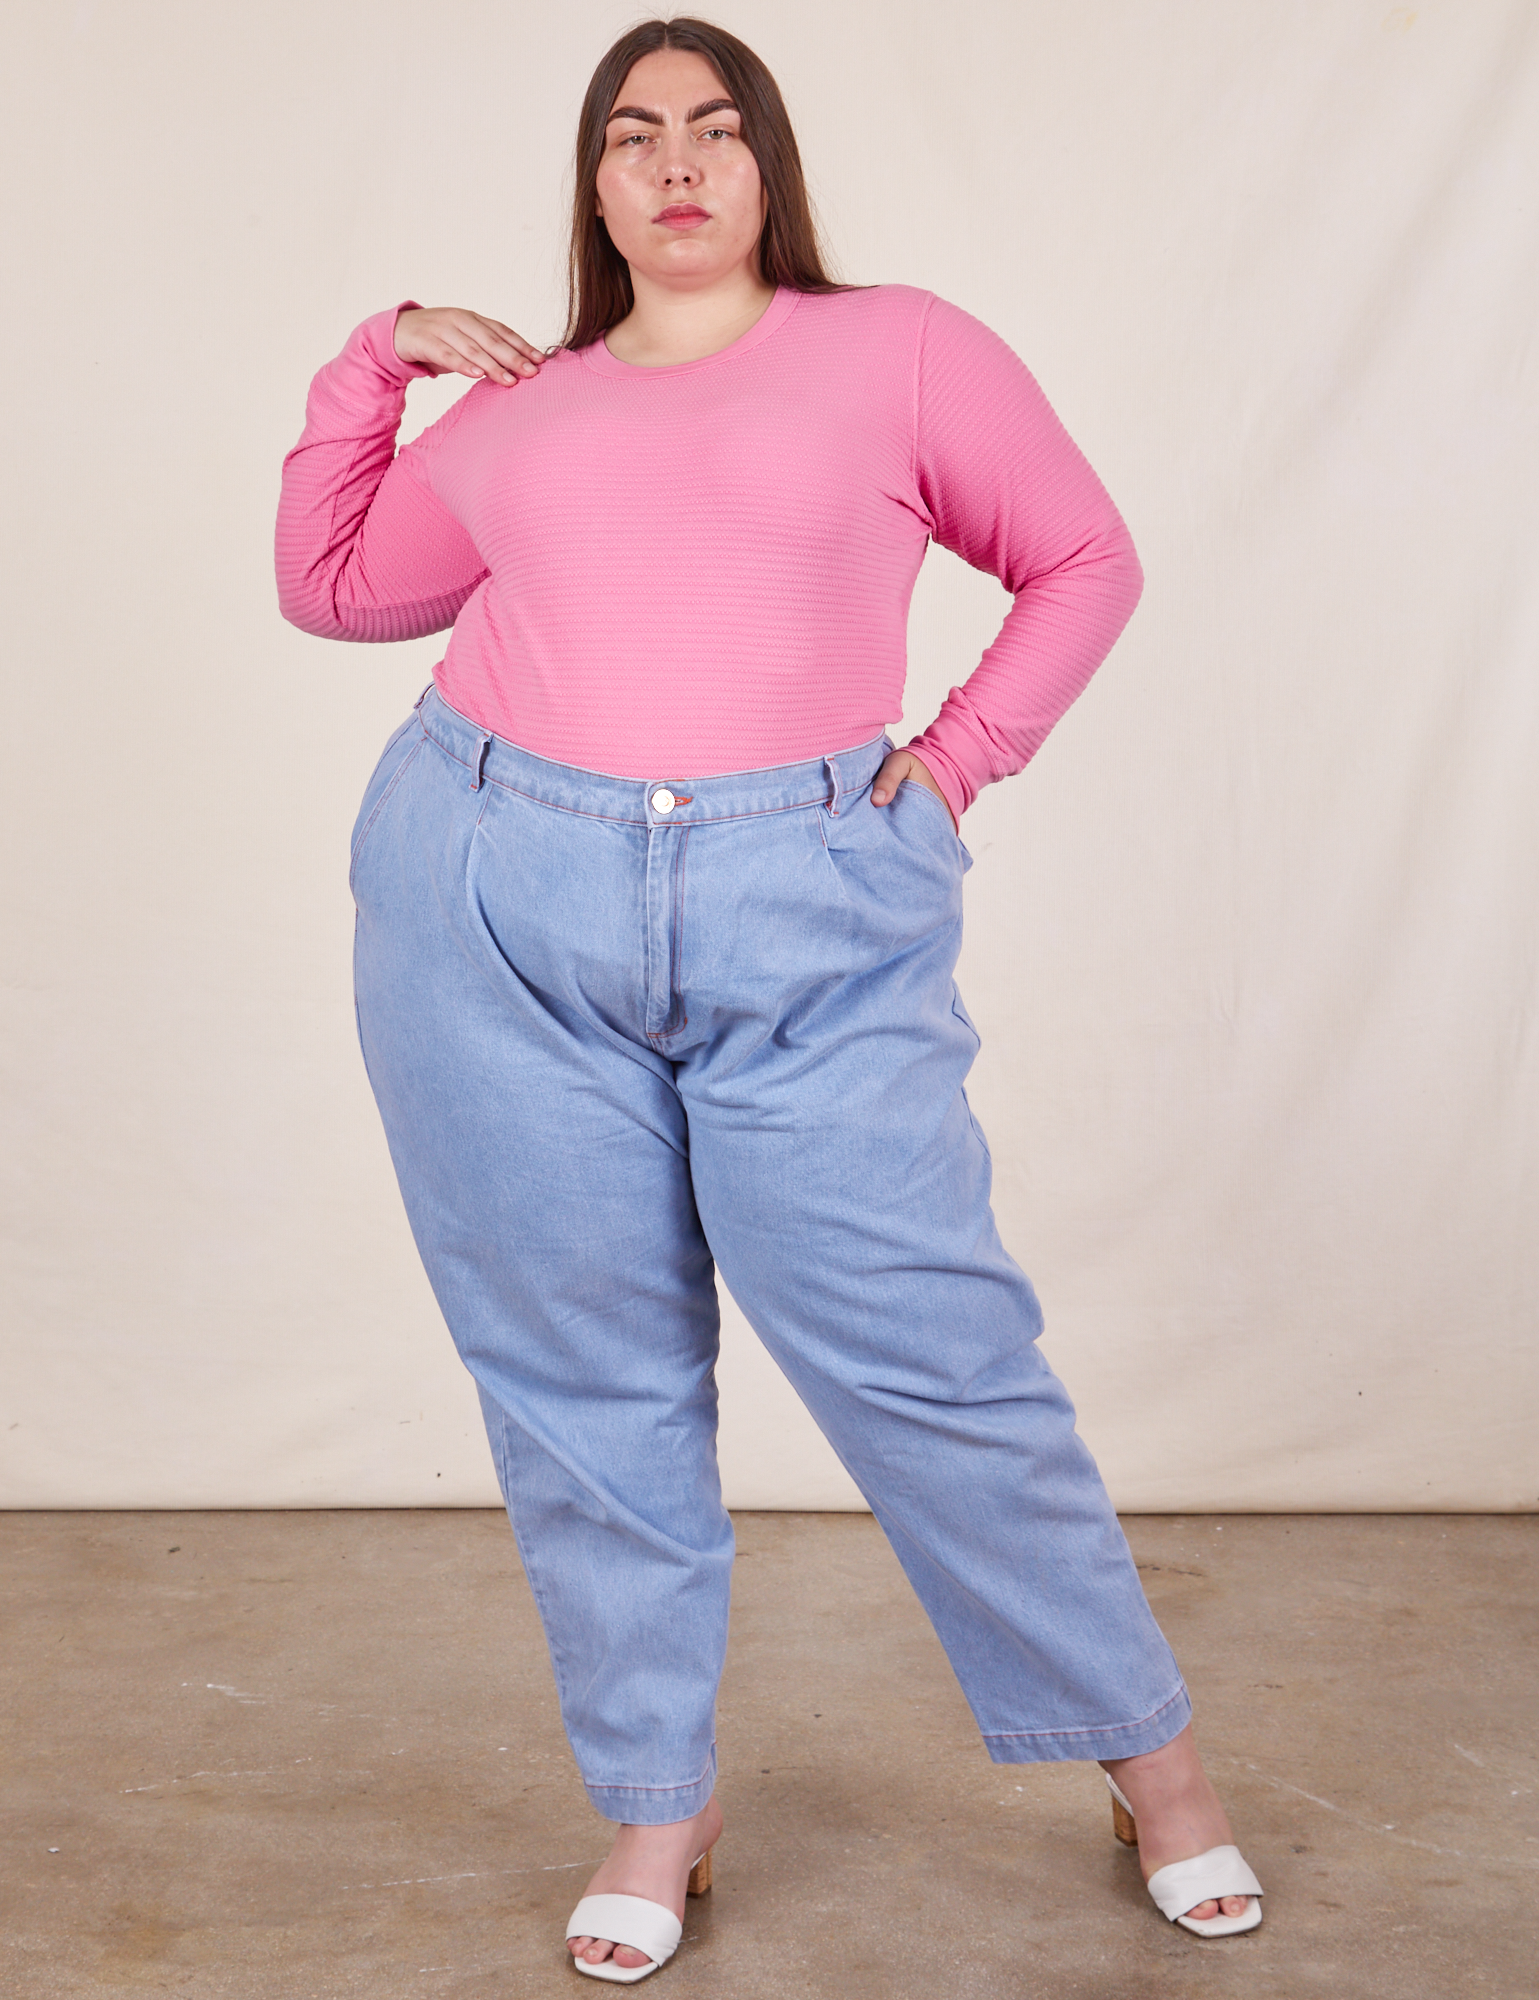 Marielena is wearing Honeycomb Thermal in Bubblegum Pink tucked into light wash Denim Trousers